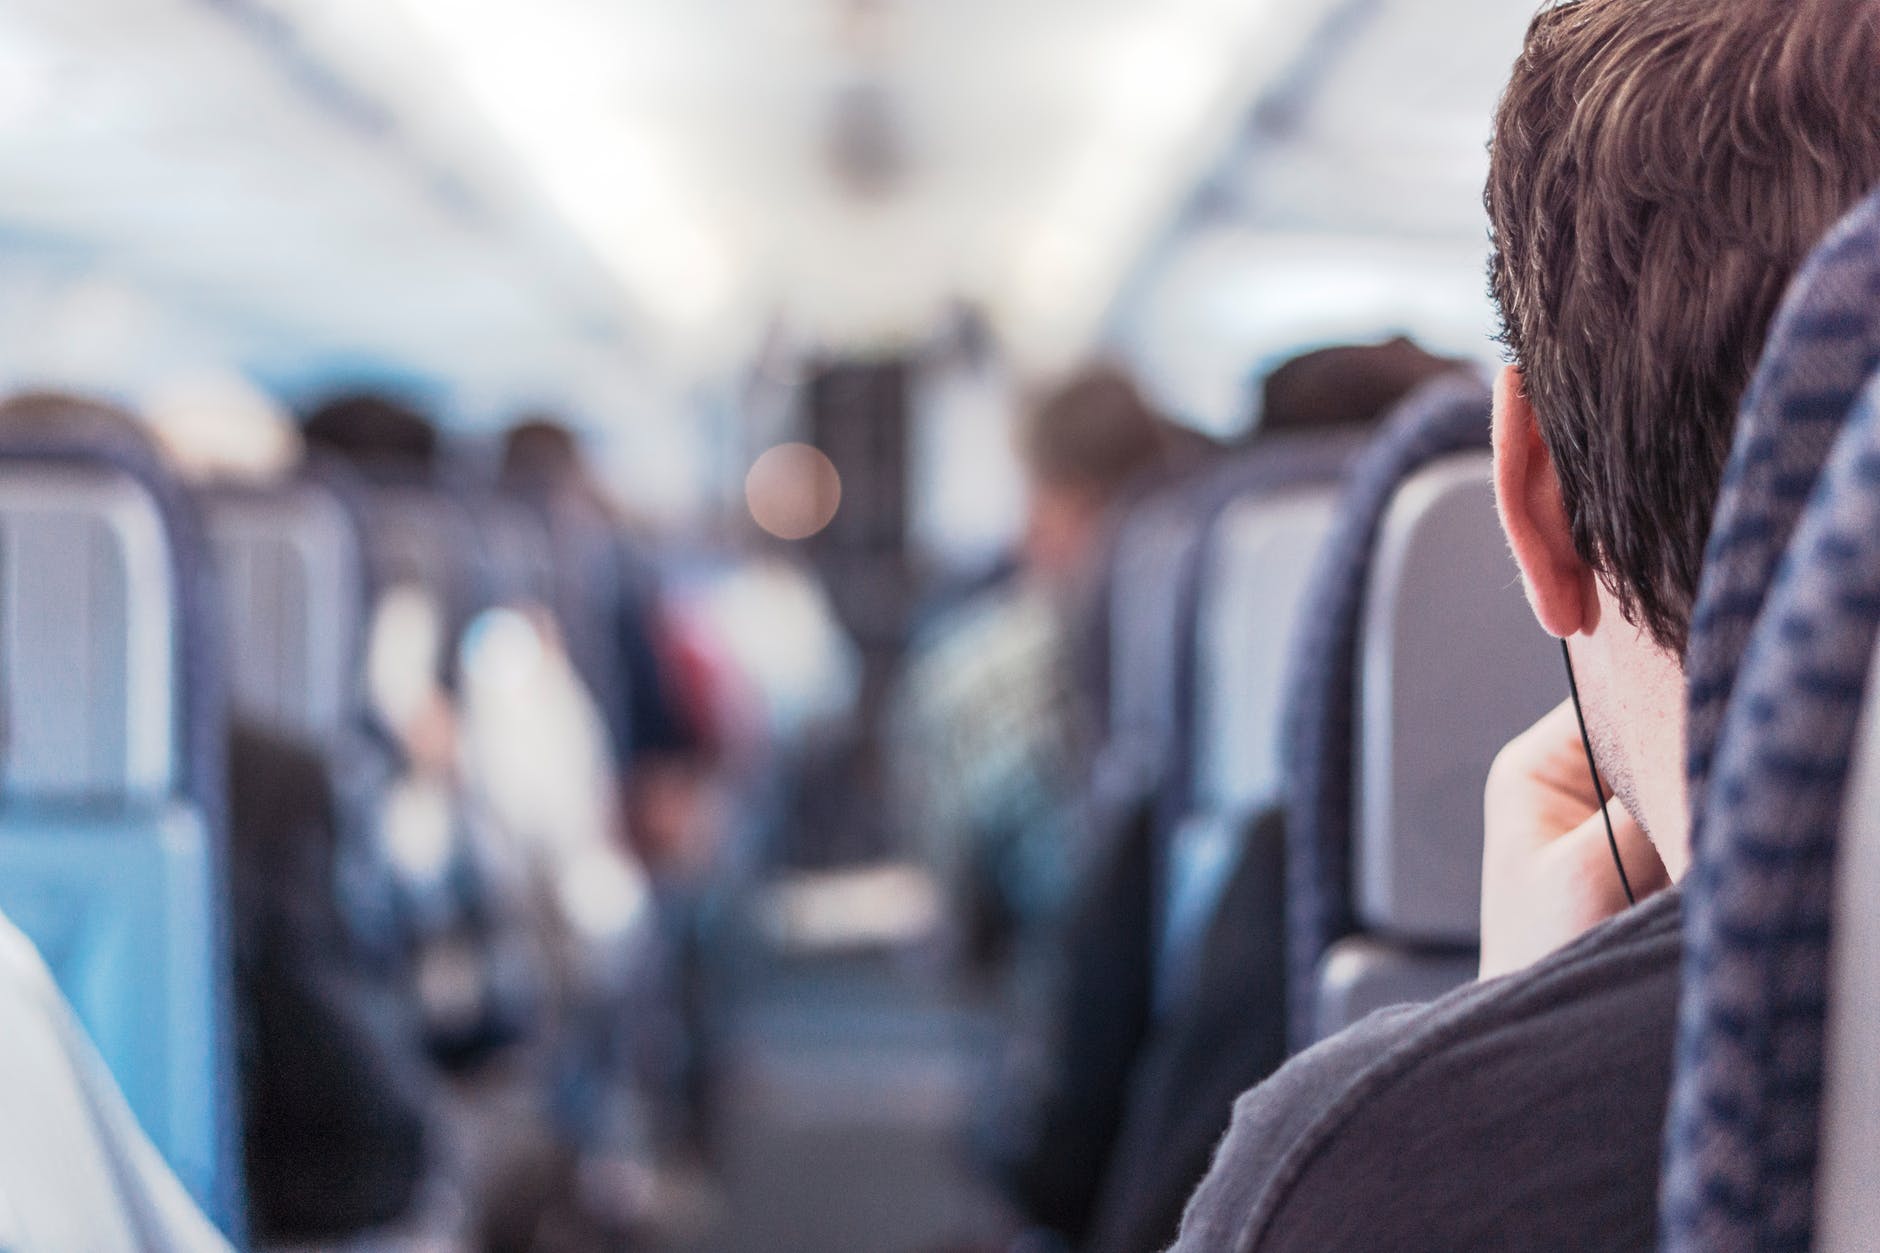 People on board an airplane. | Photo: Pexels